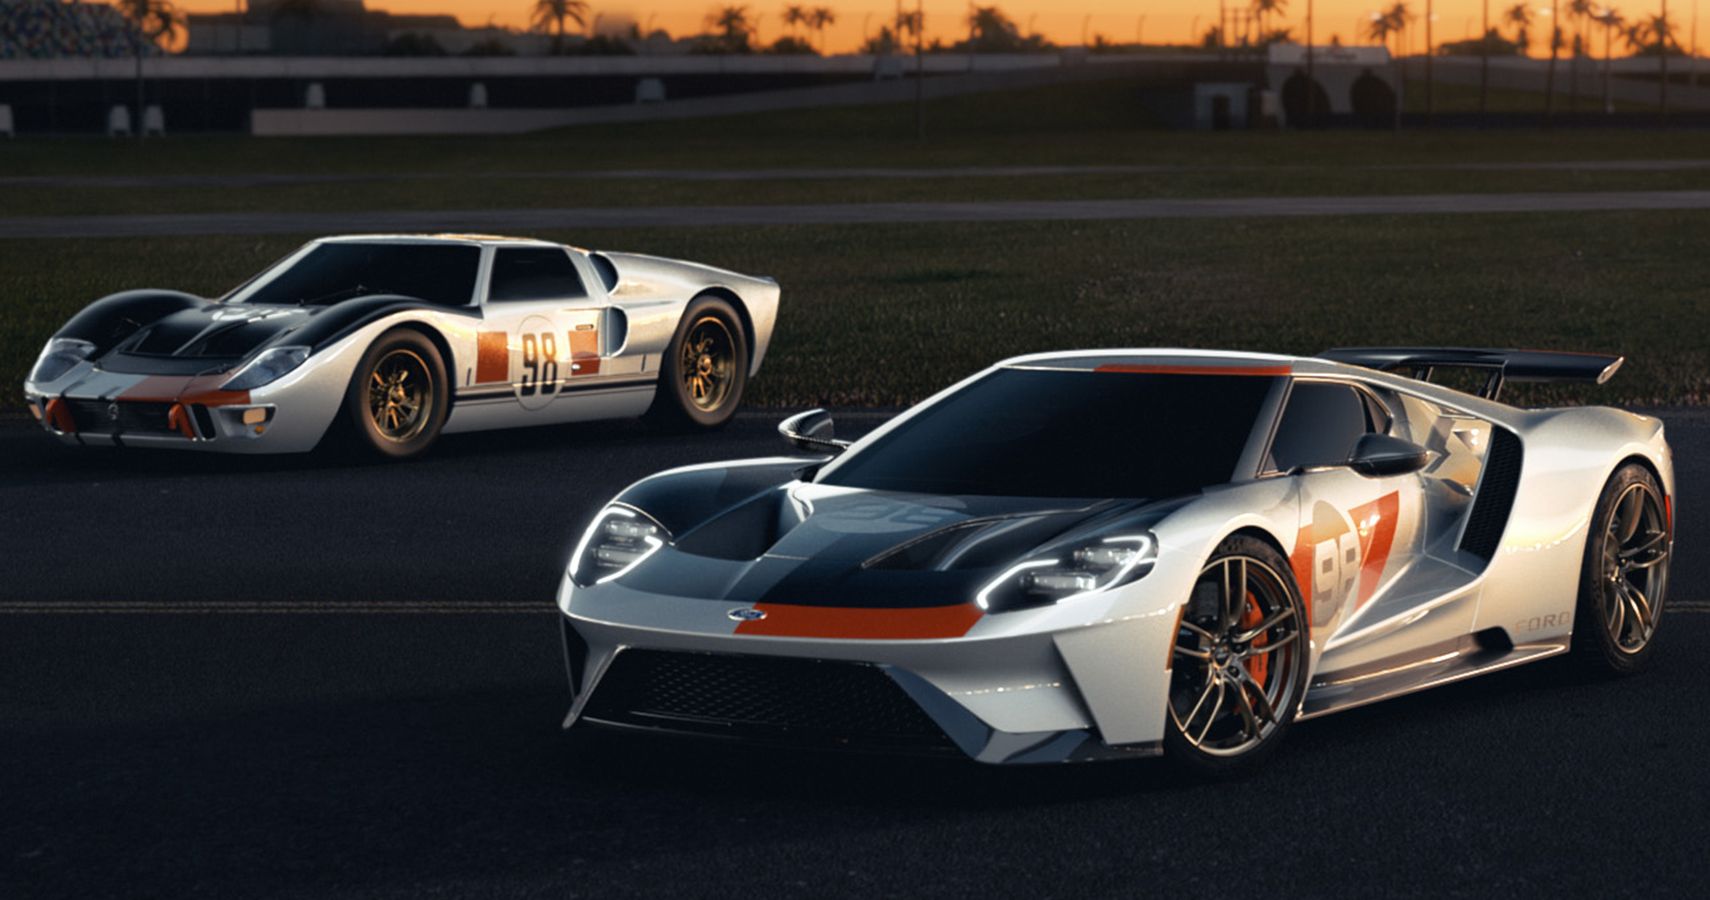 2021 Ford GT Heritage Edition inspired by the GT40 MK II’s 1966 Daytona 24 Hour Continental race